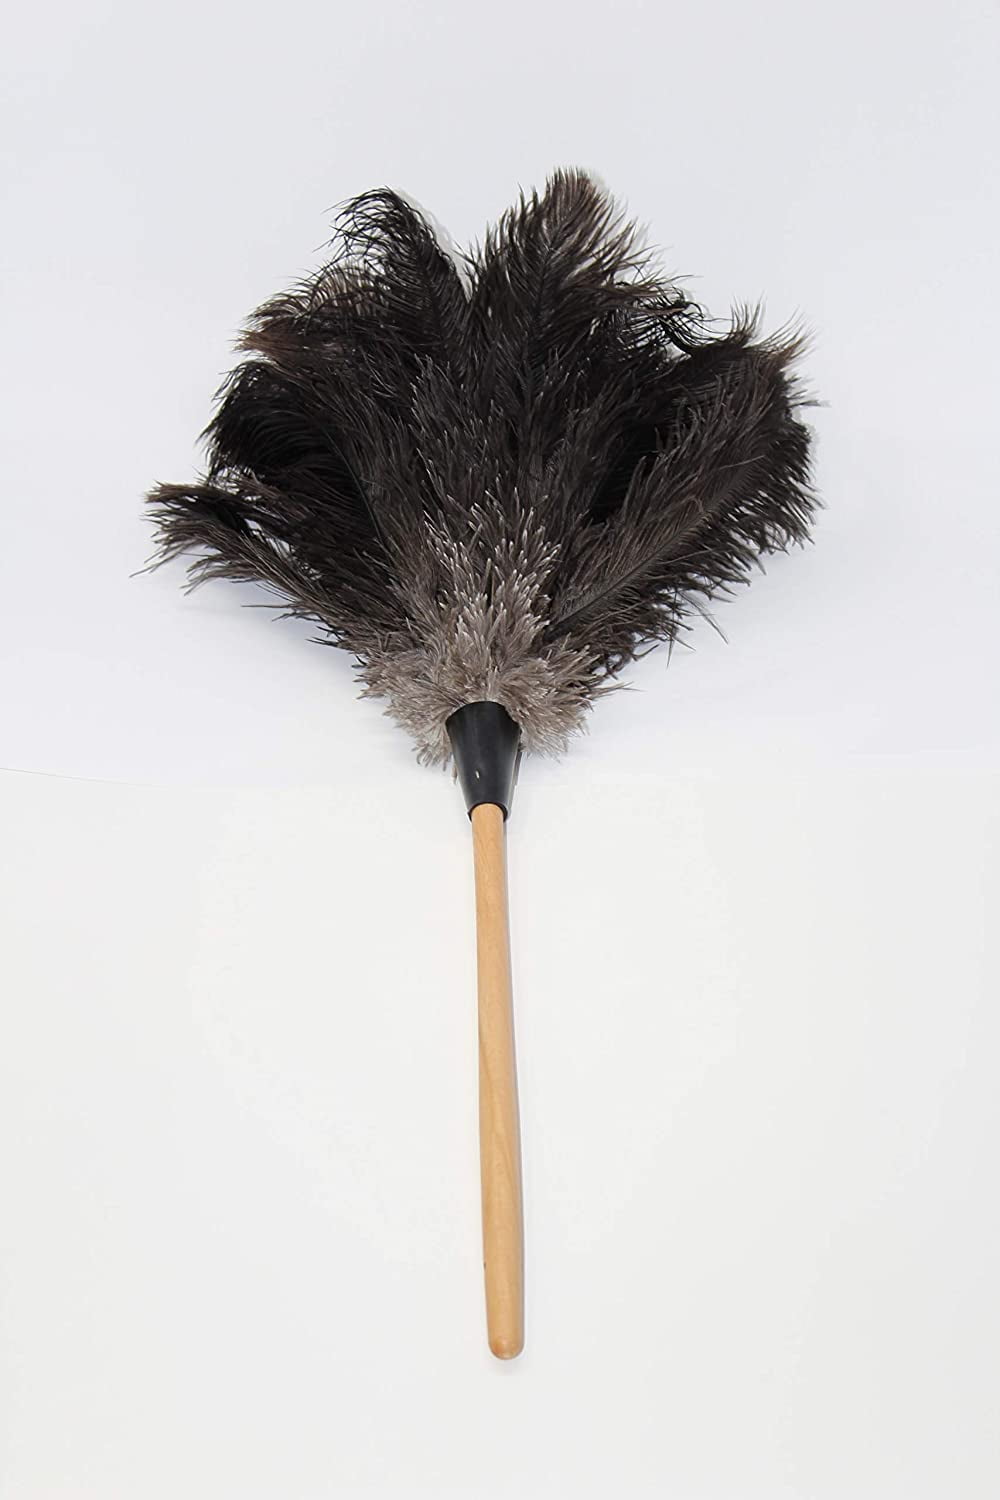 EVERCLEAN Ostrich Feather Duster Classic 14 100% Natural Ostrich Feathers  for Dusting Contoured, Intricate & Delicate Items - Classic Wood ErgoGrip